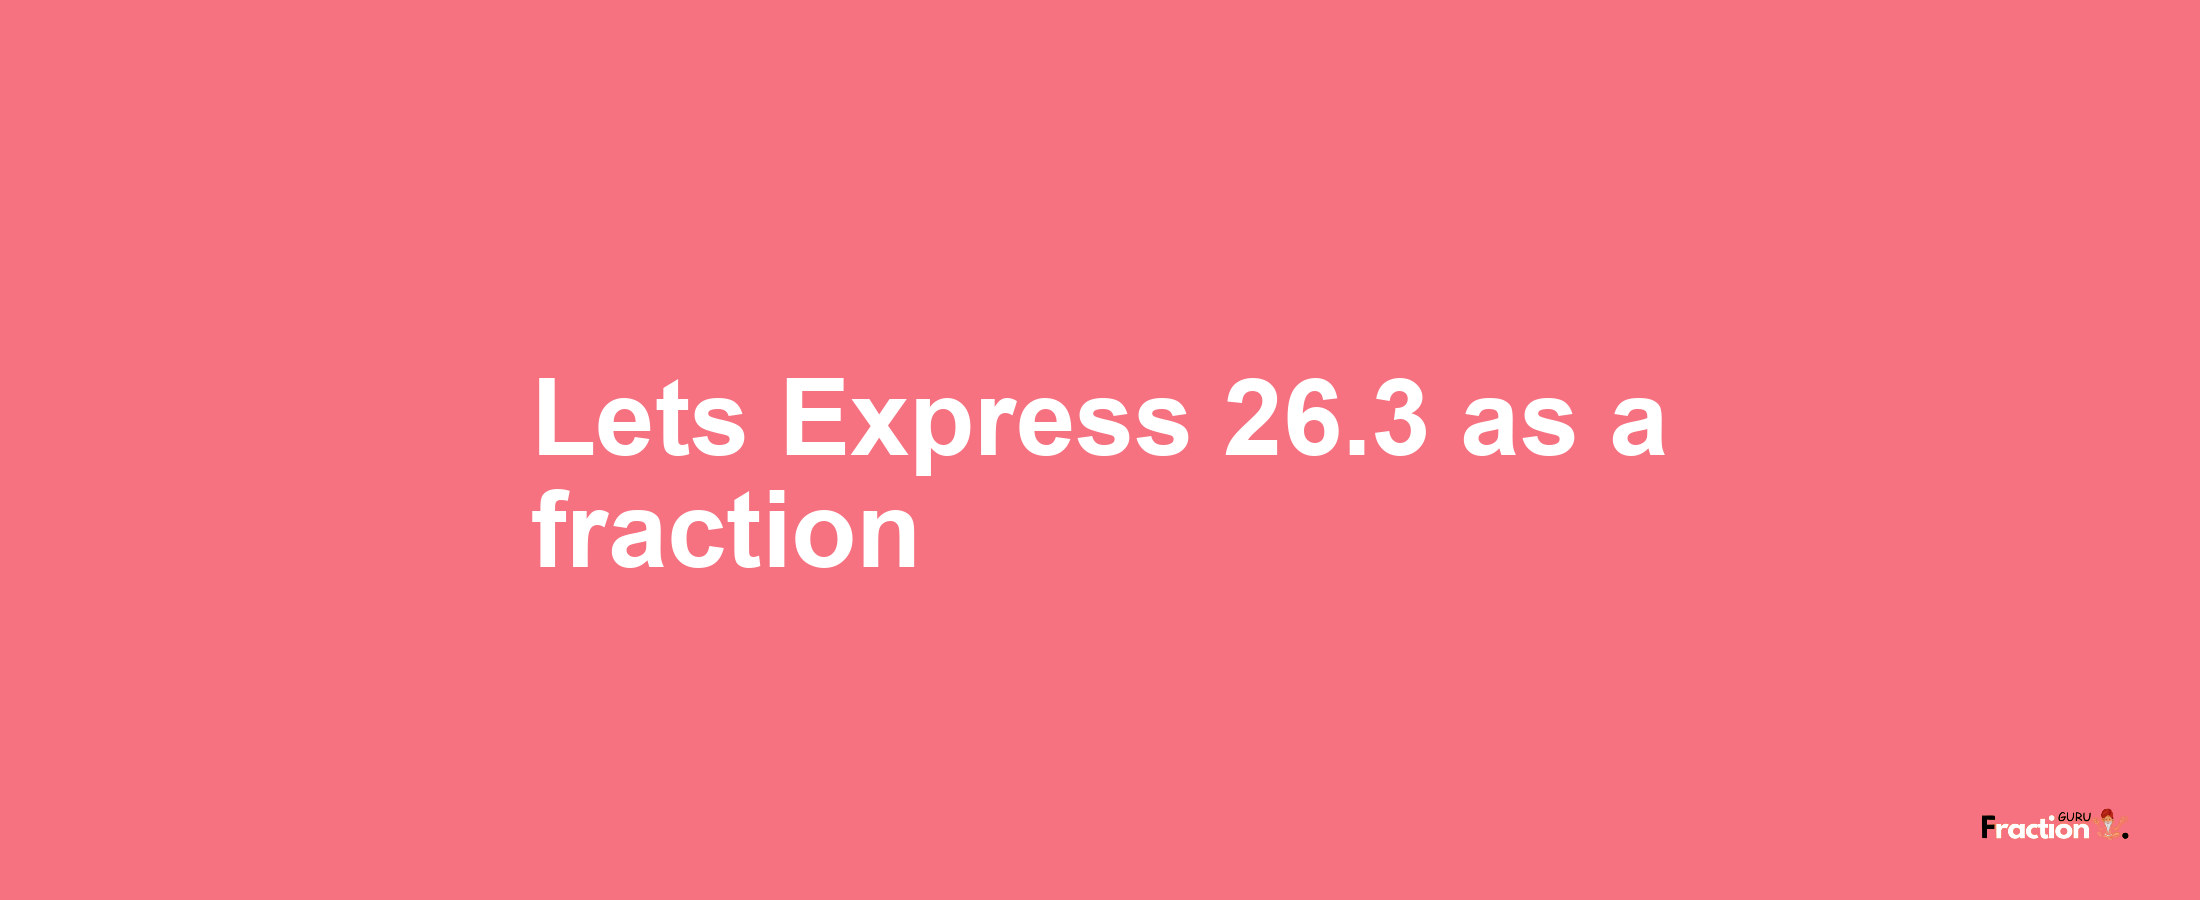 Lets Express 26.3 as afraction